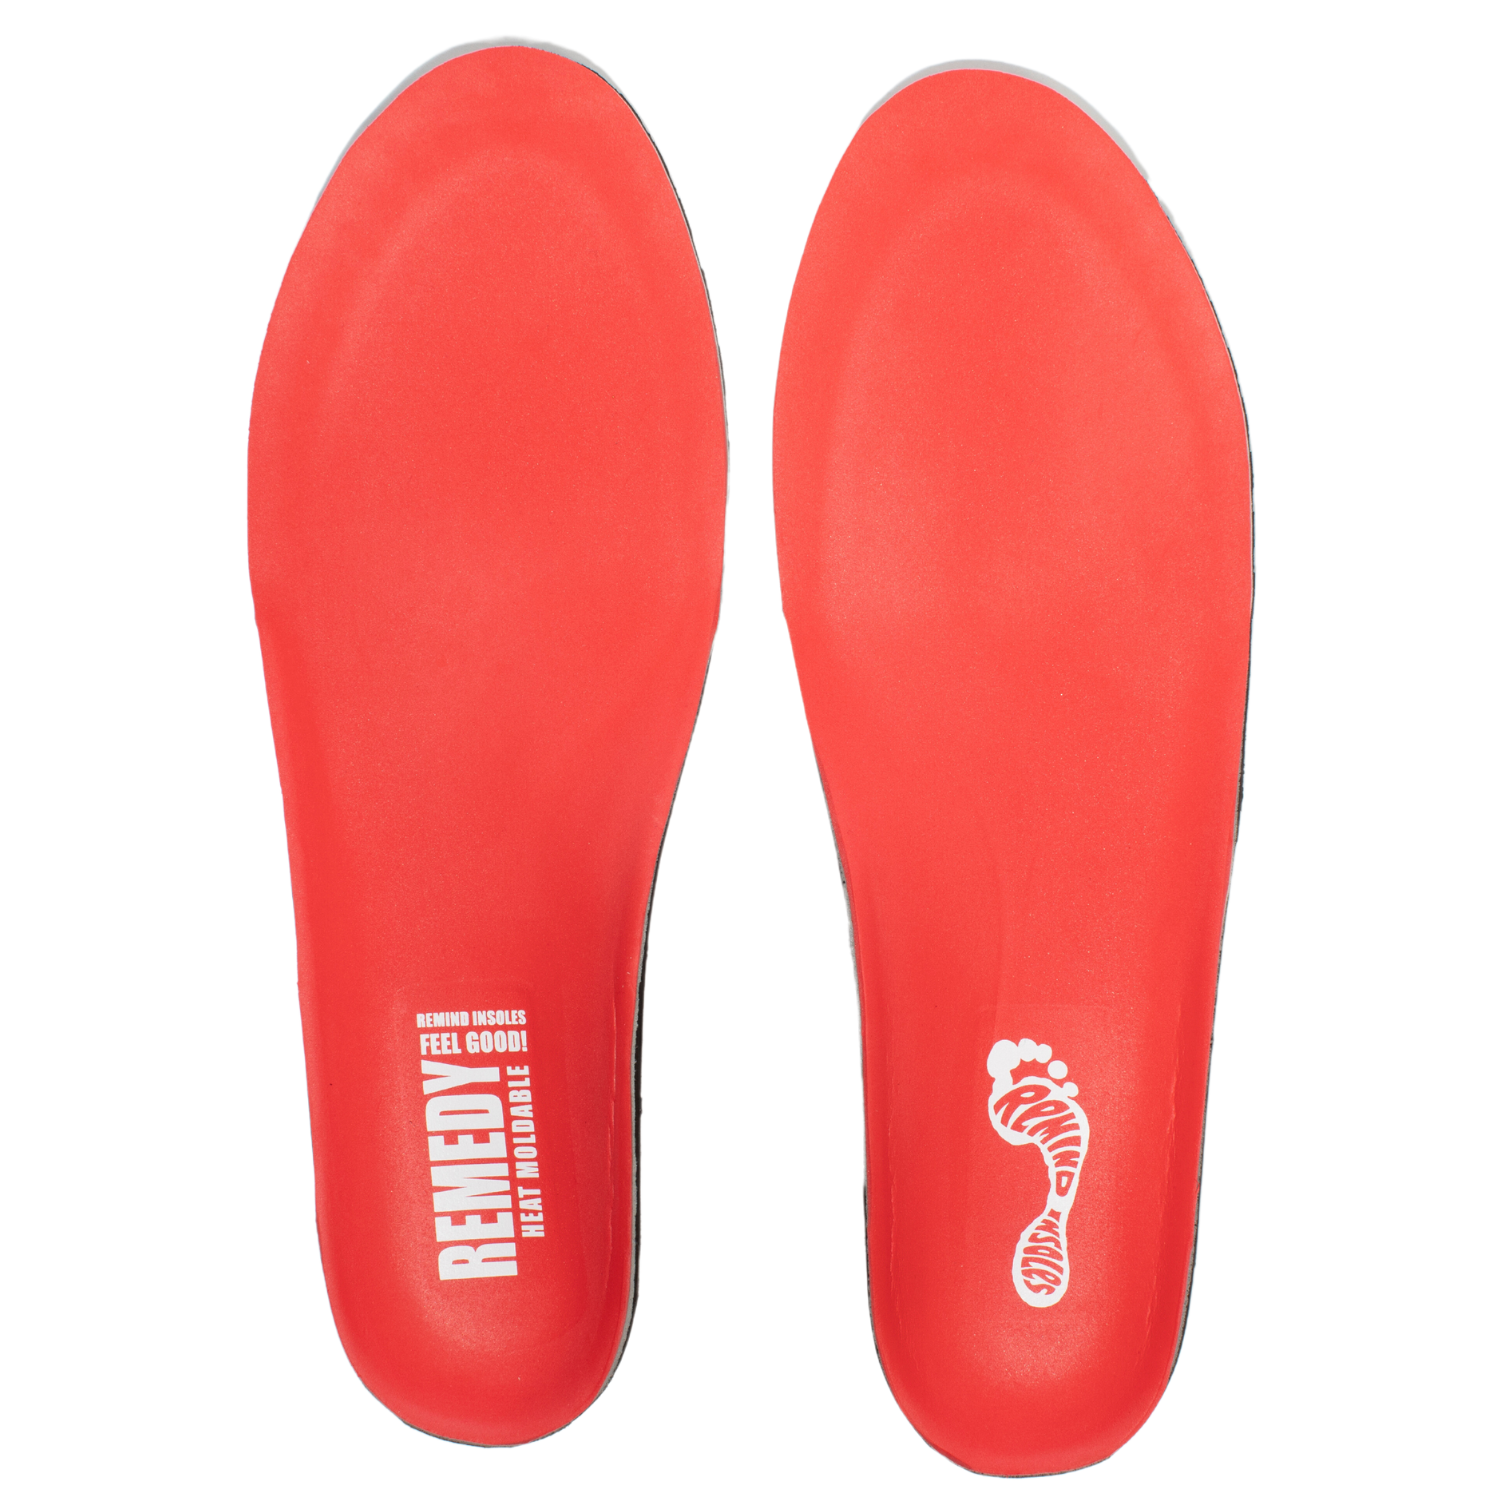 Remind Insoles The Remedy 6MM Custom Arch Heat Moldable Insoles, 13 13.5